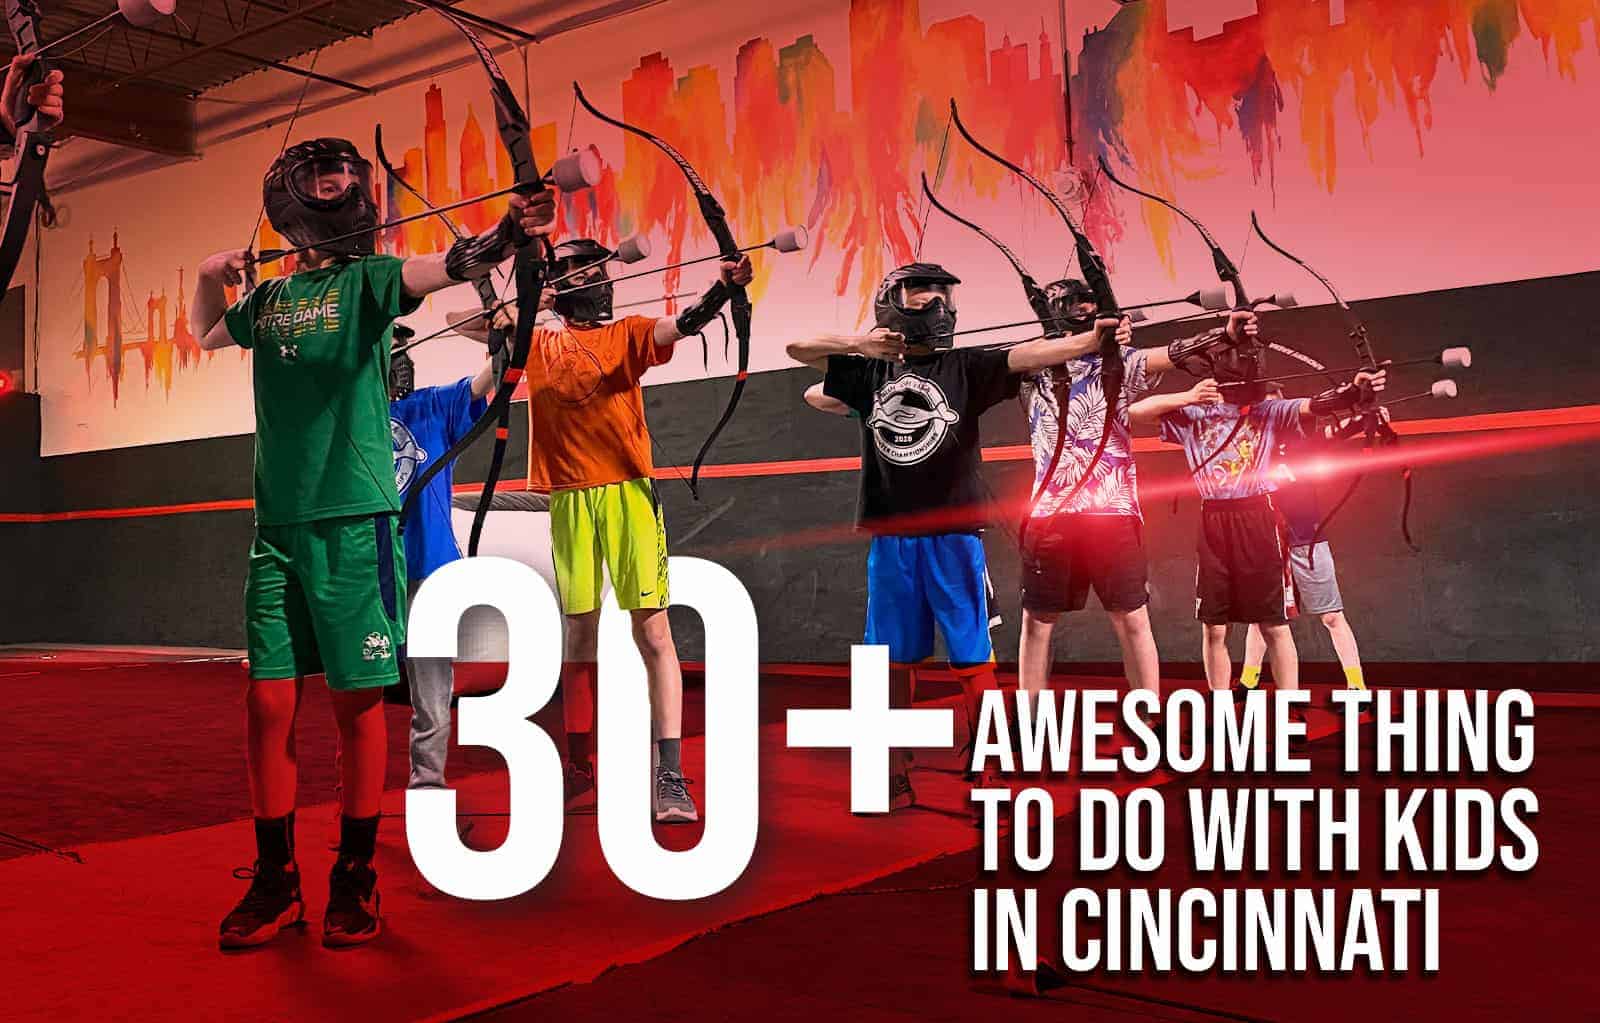 30+ Awesome Things To Do With Kids In Cincinnati